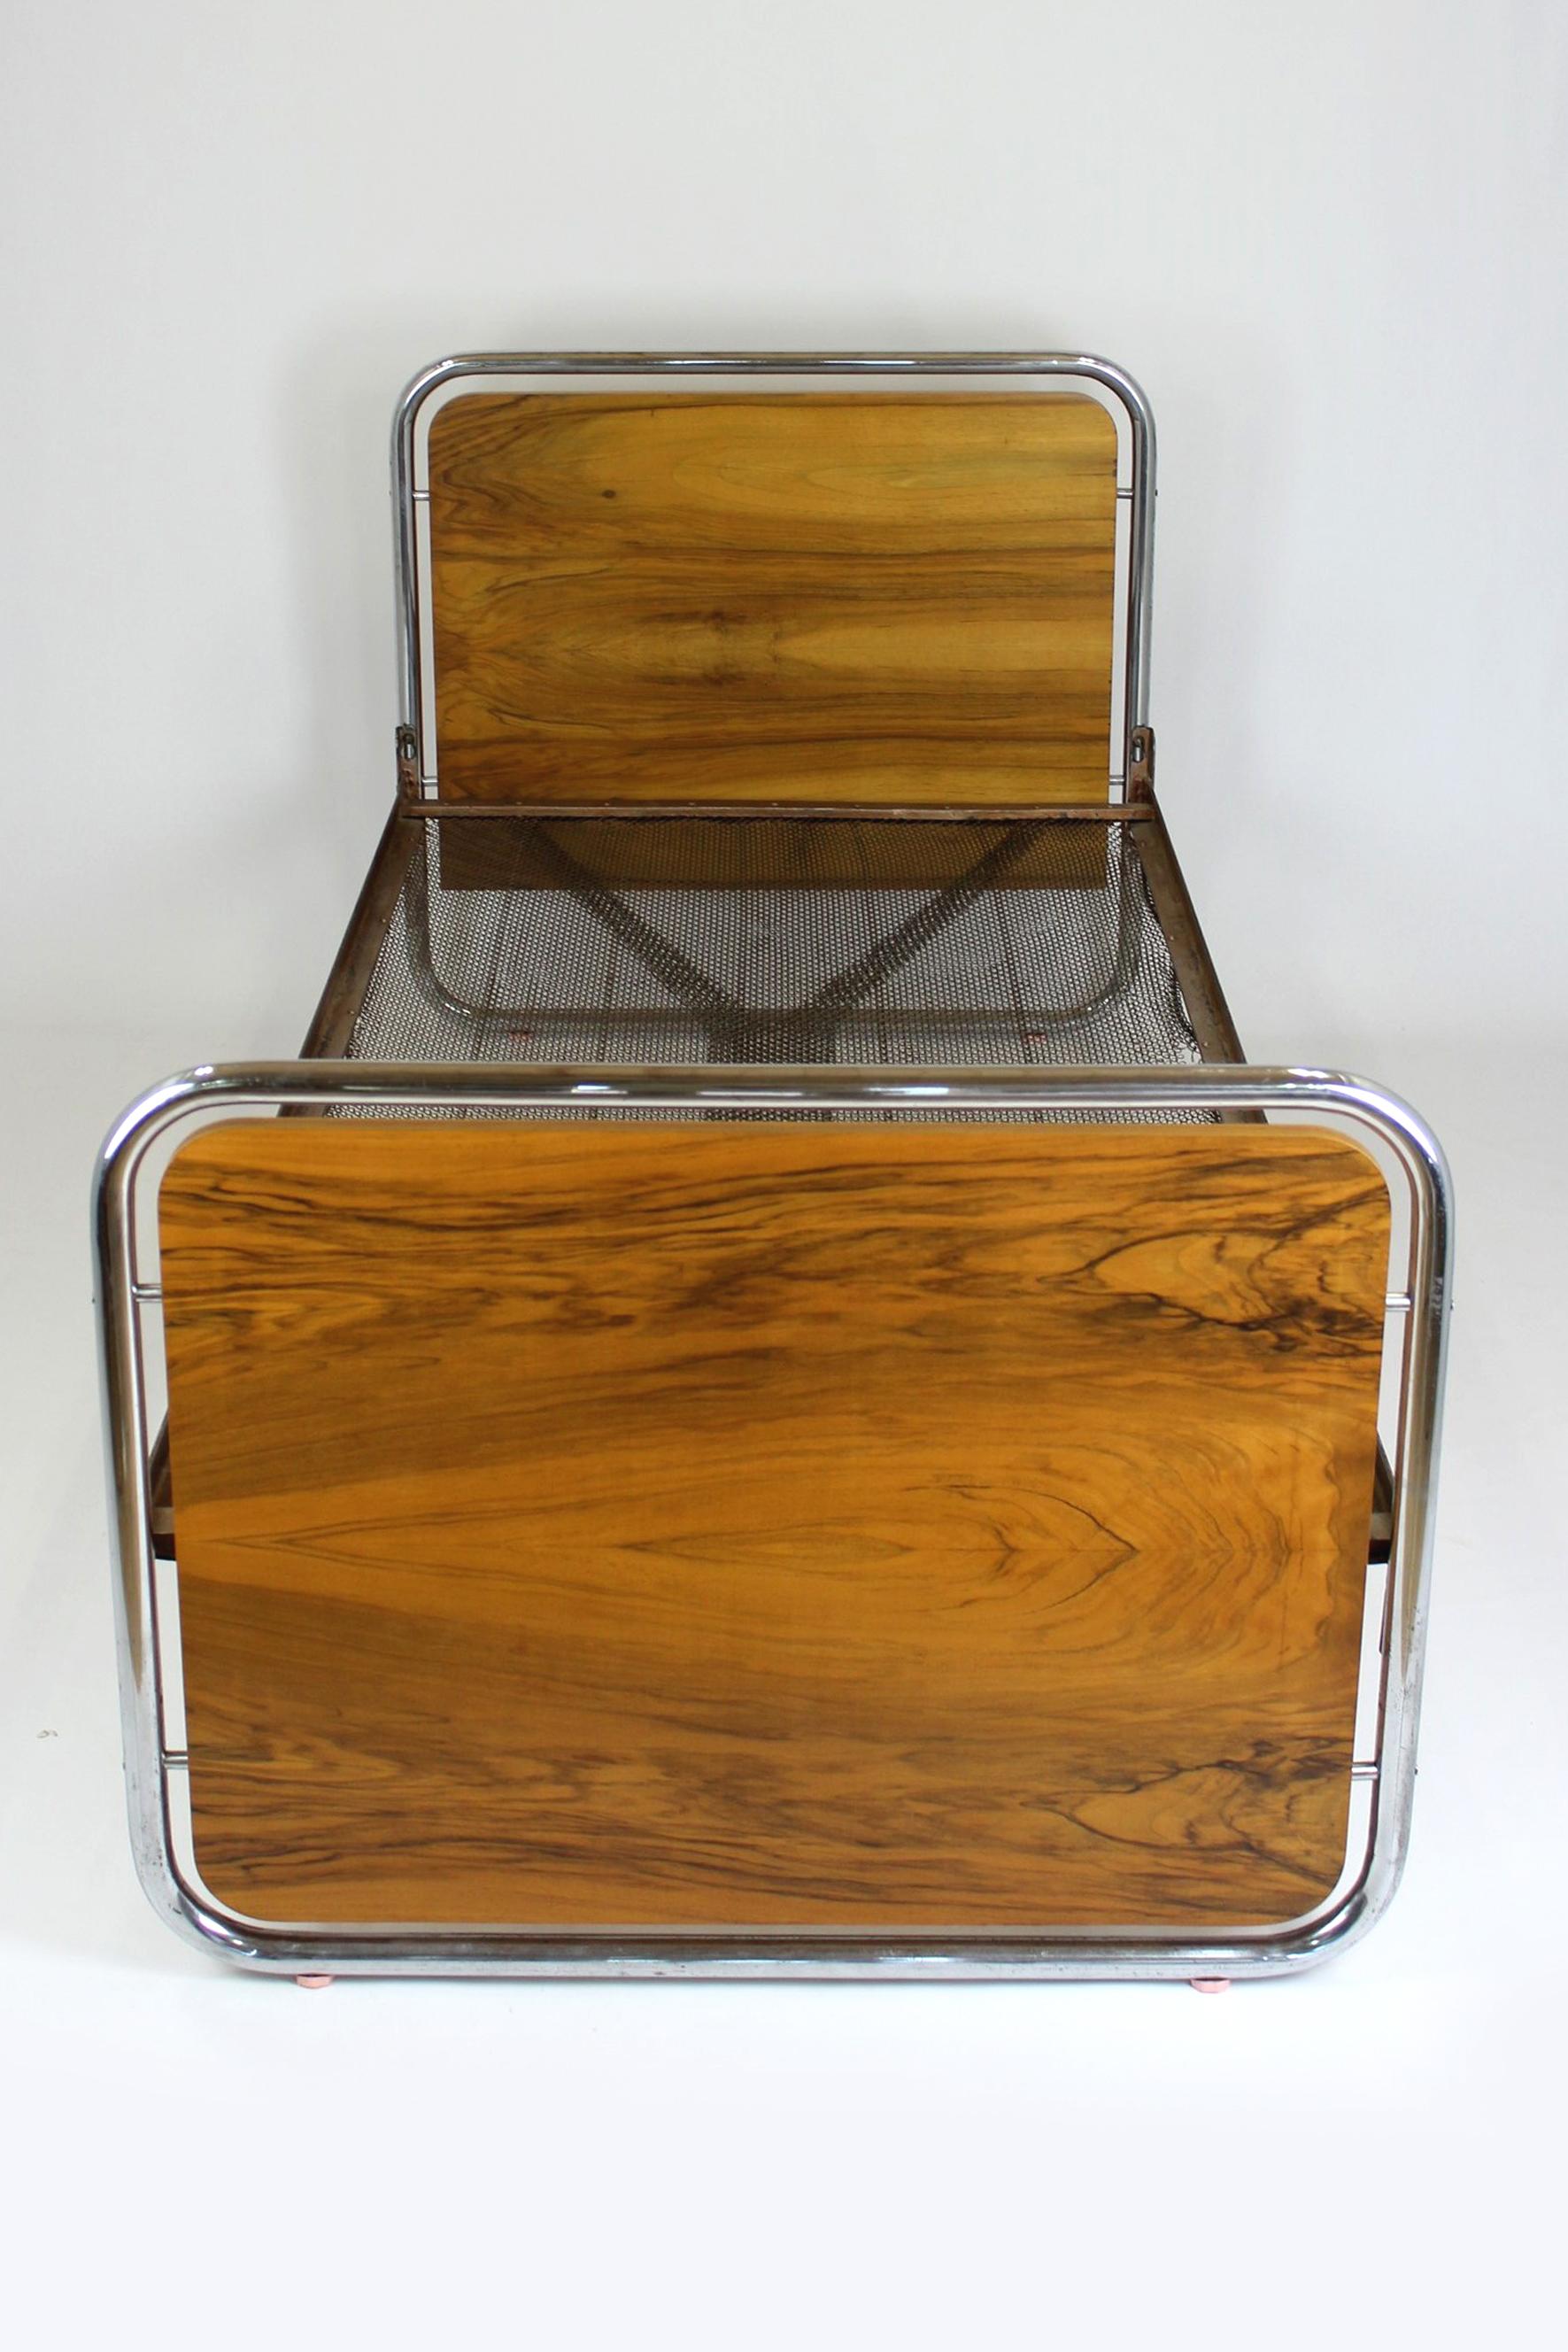 This Bauhaus-style beds were produced in the 1940s in Czechoslovakia. They are made of walnut and set on chromed tubular steel frames.
The beds have been partially restored, the wood is lacquered in a satin finish. Chrome elements are preserved in